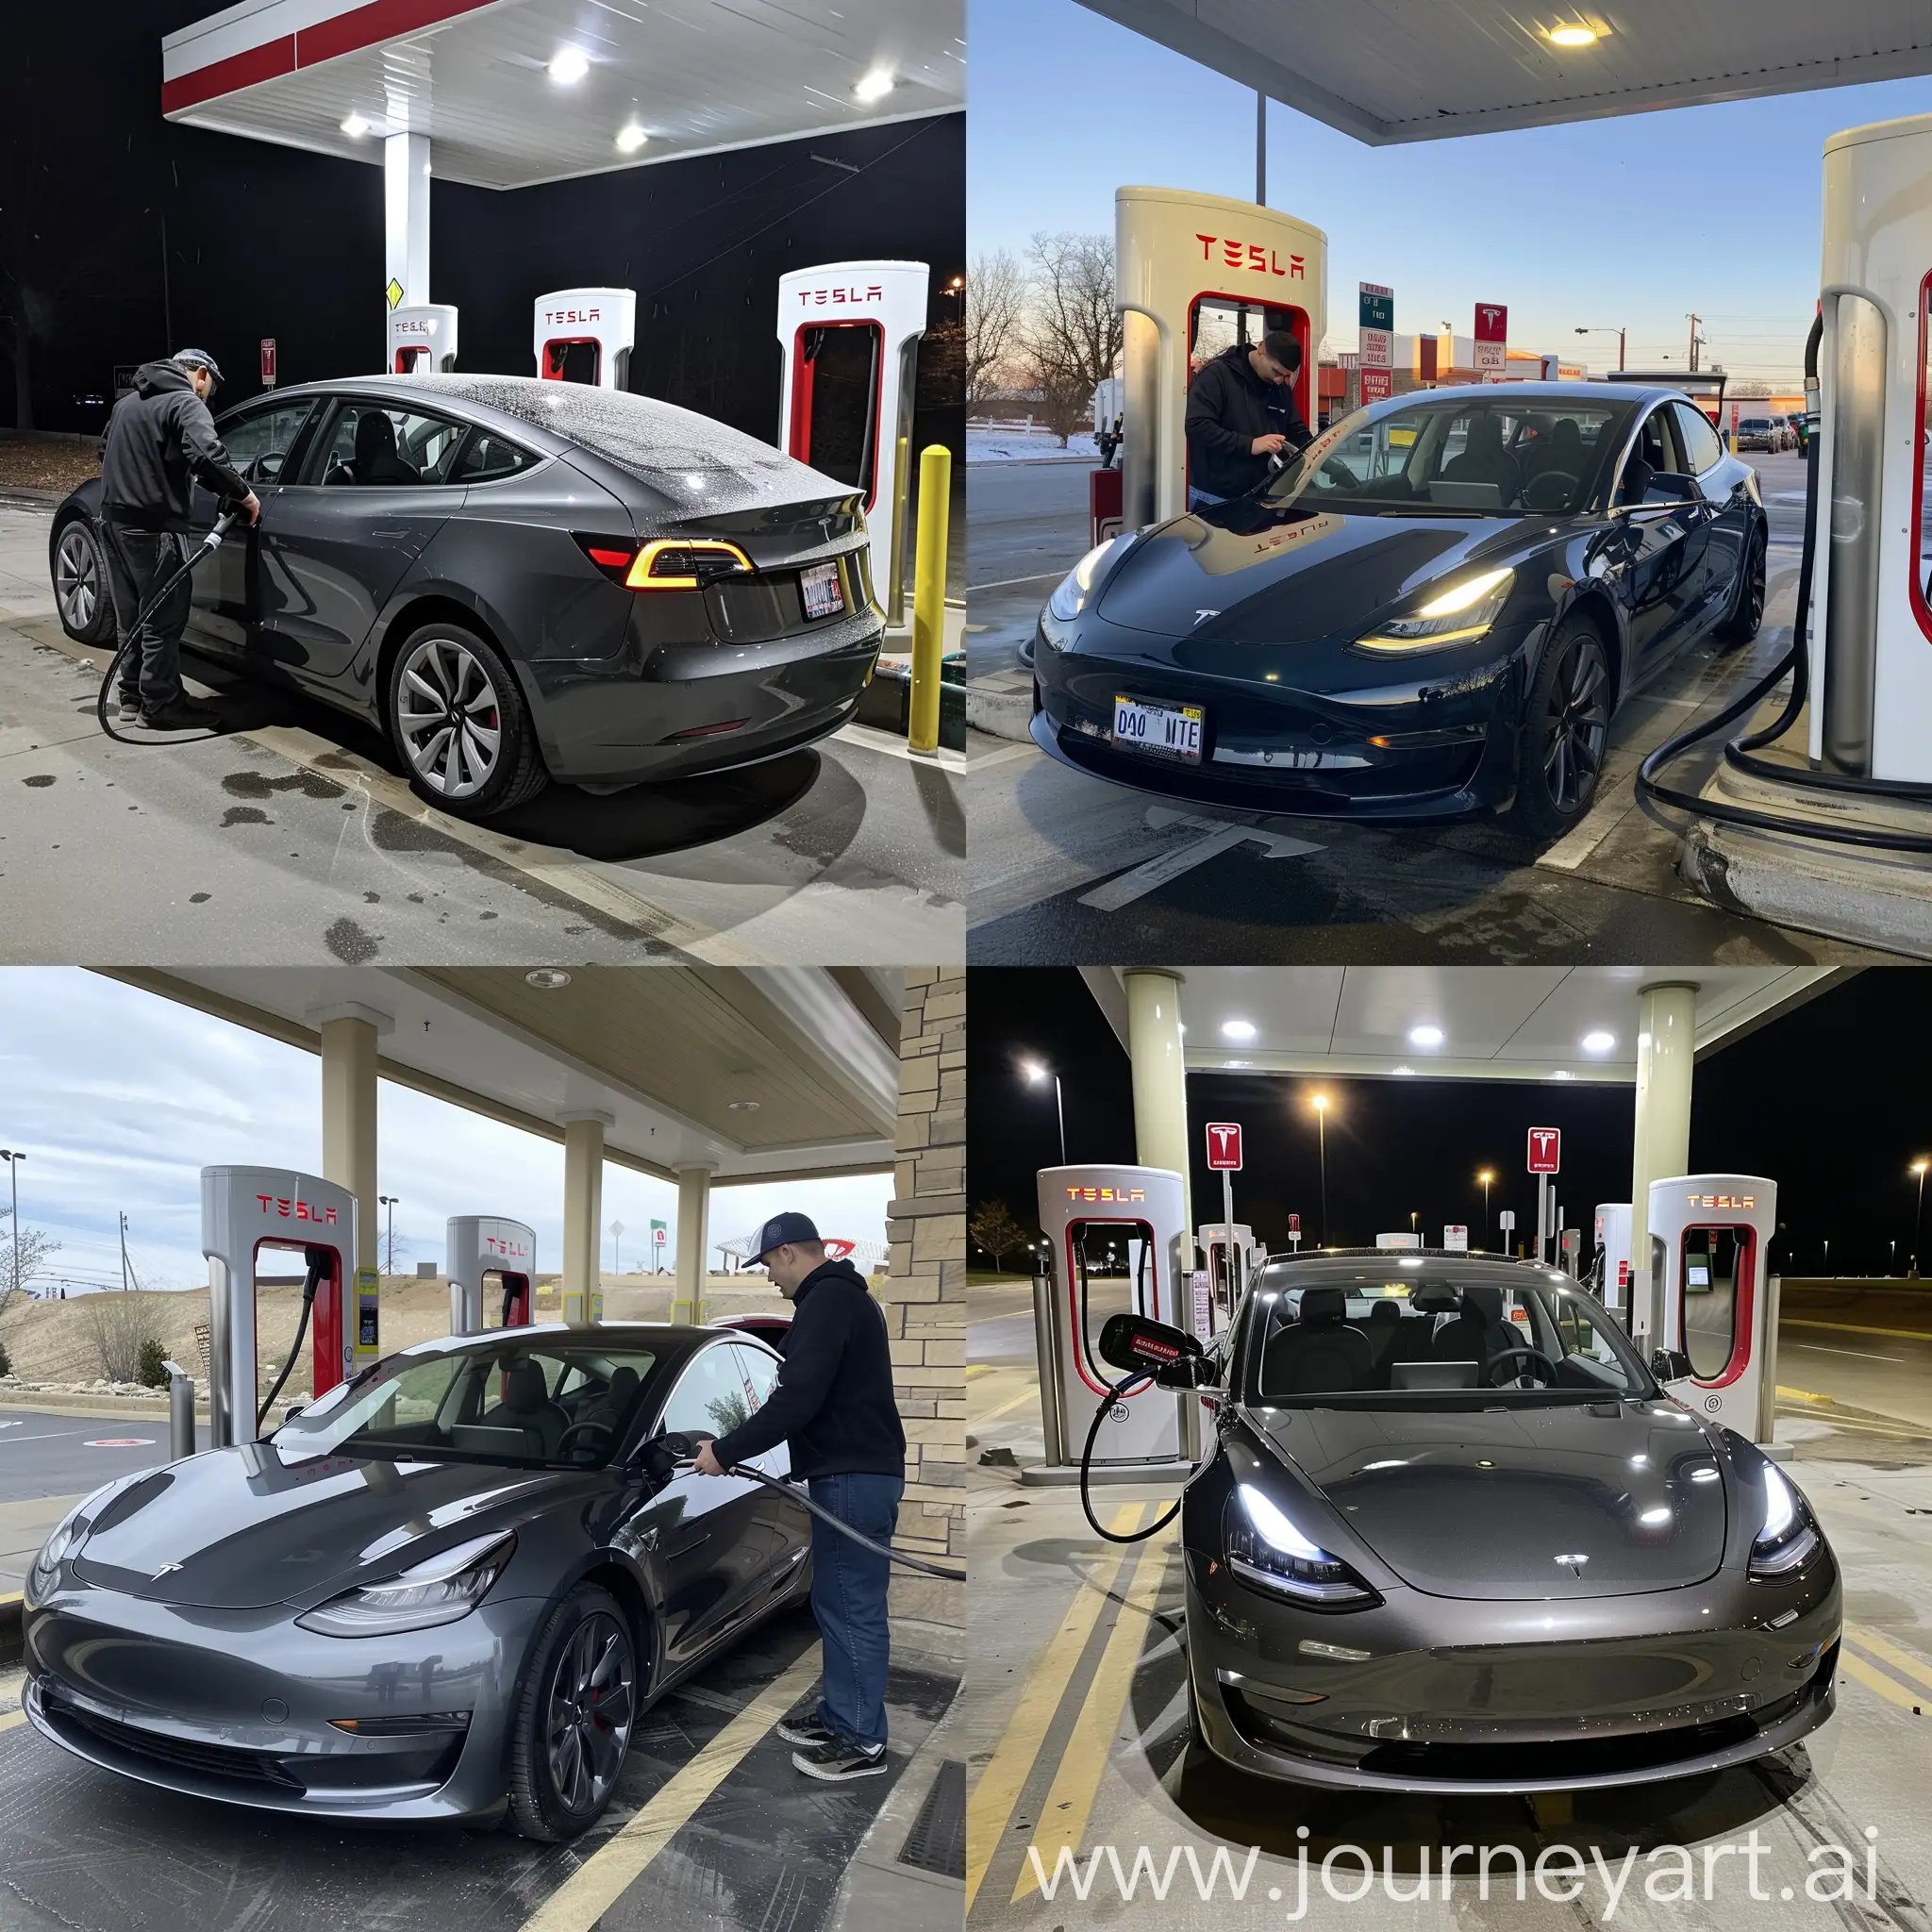 Tesla driver fueling his car at gas station 